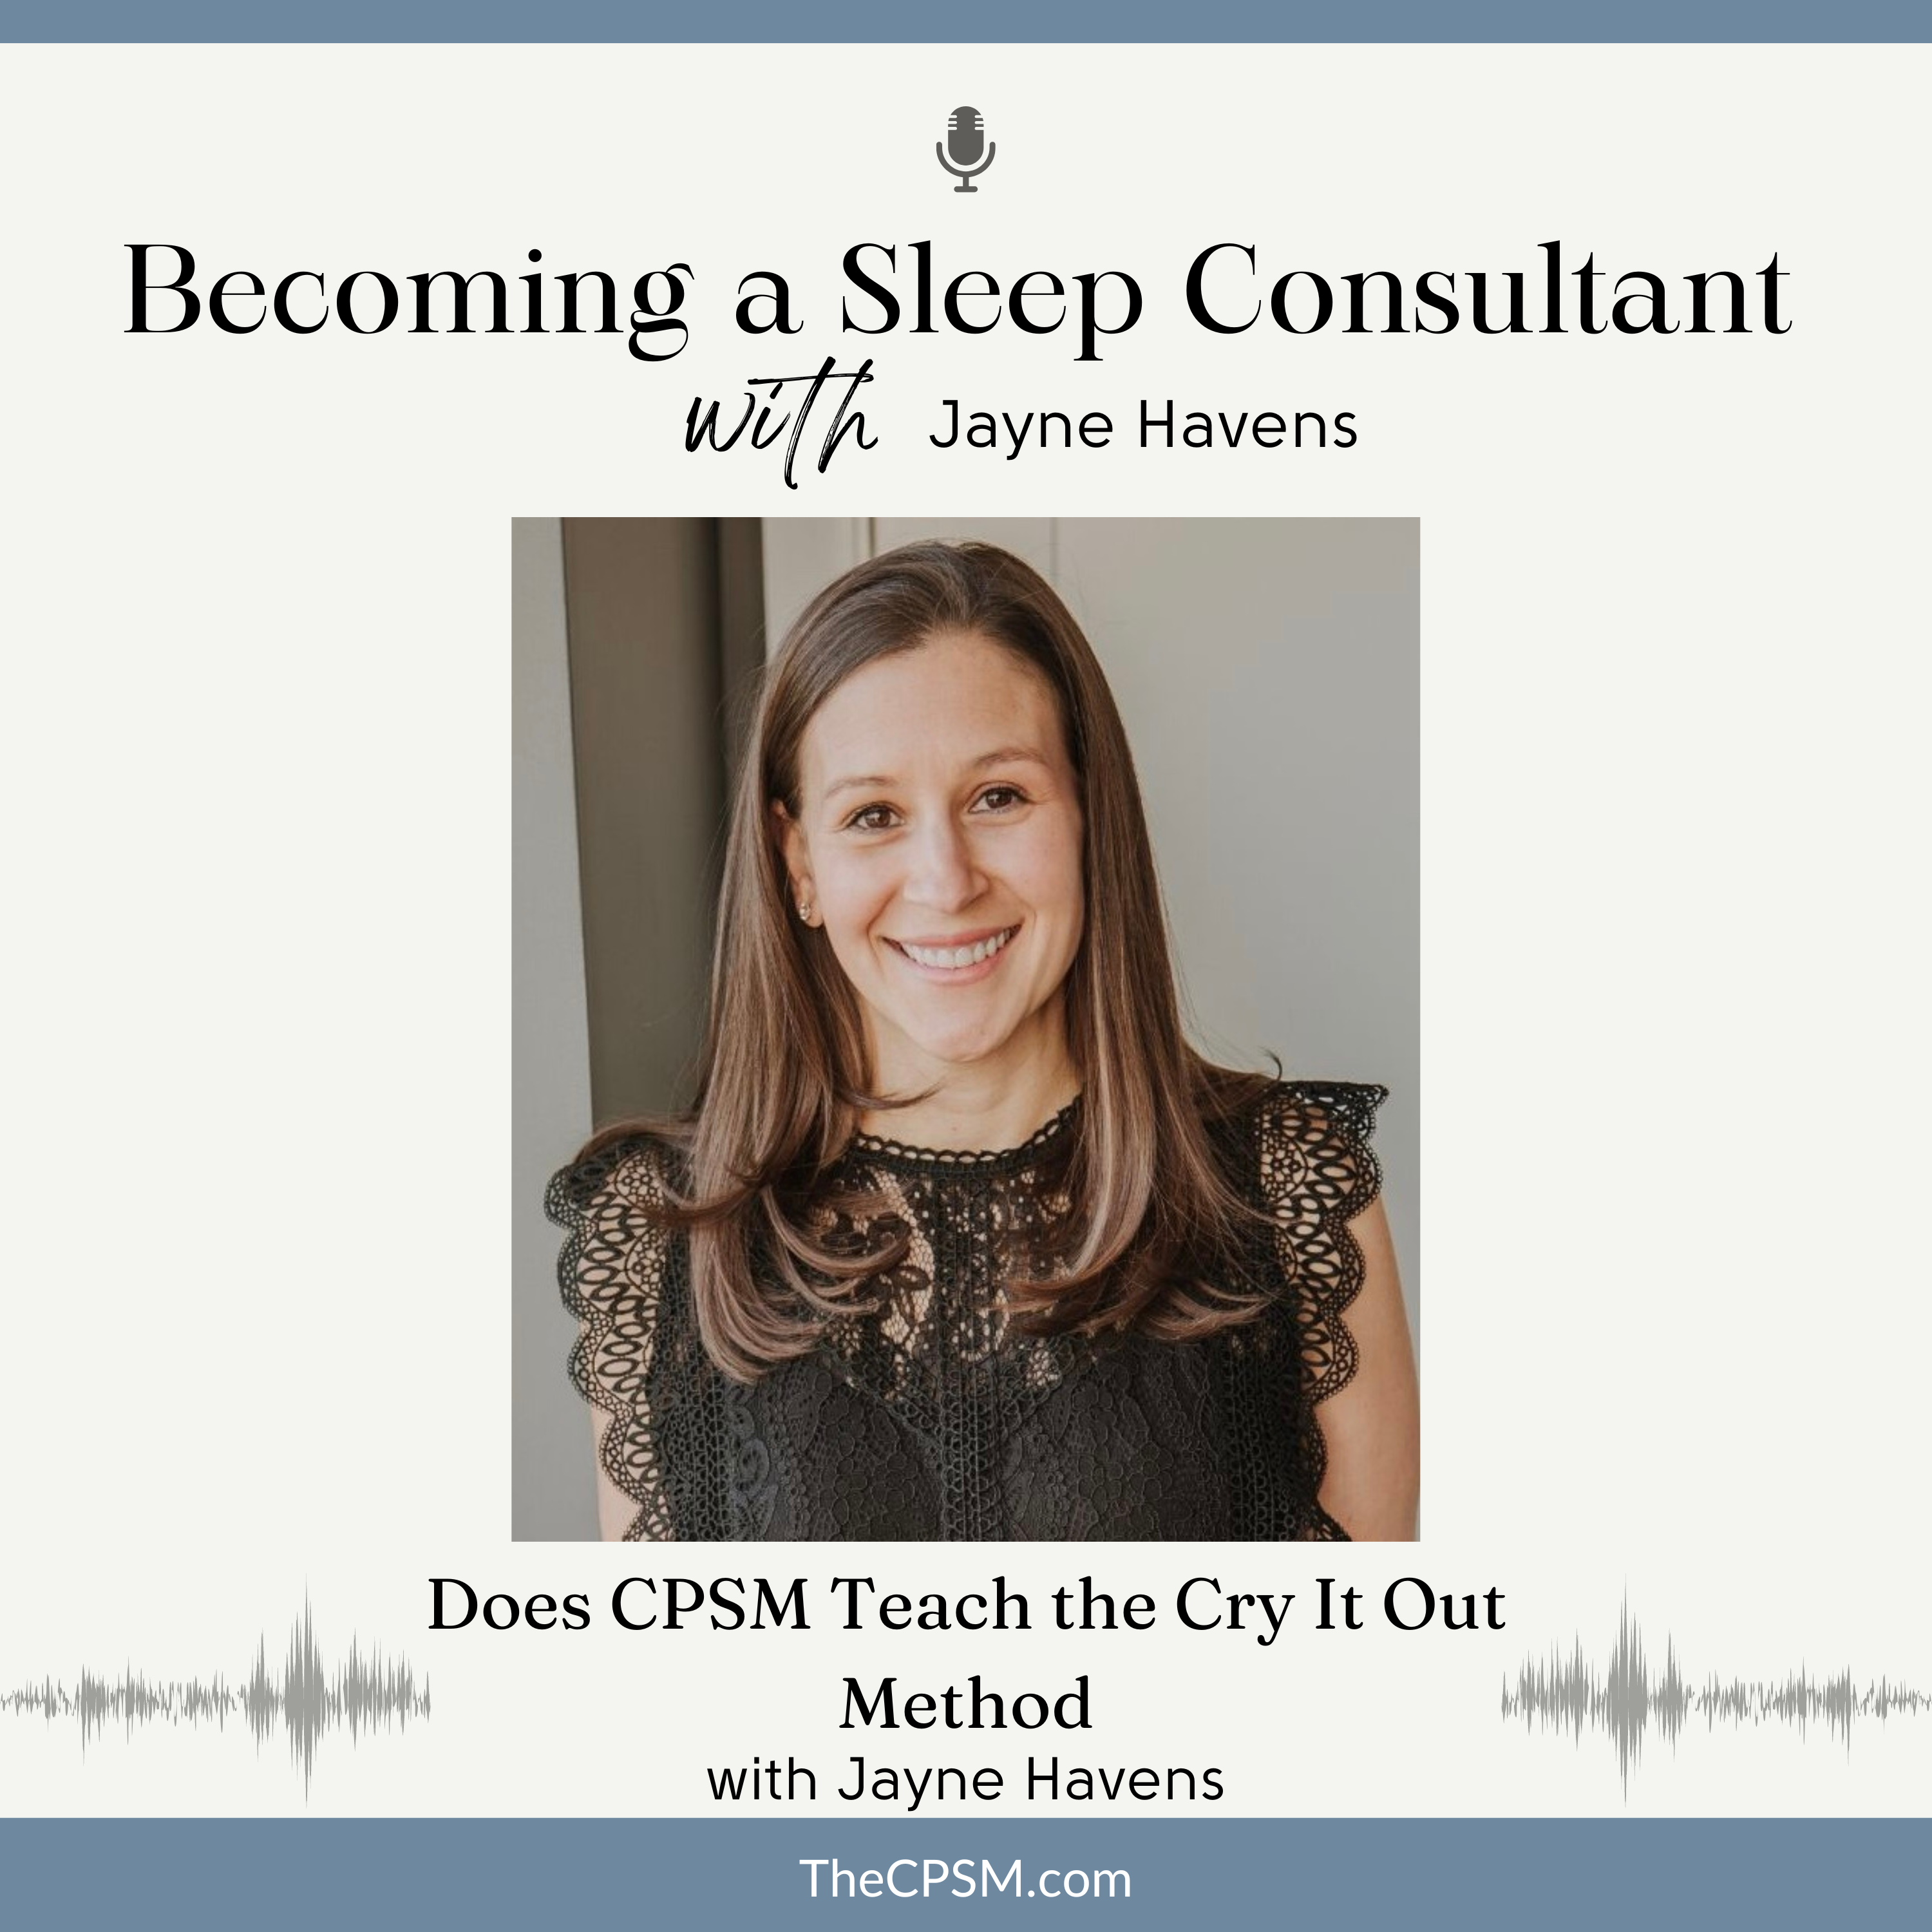 Does CPSM Teach the Cry It Out Method?